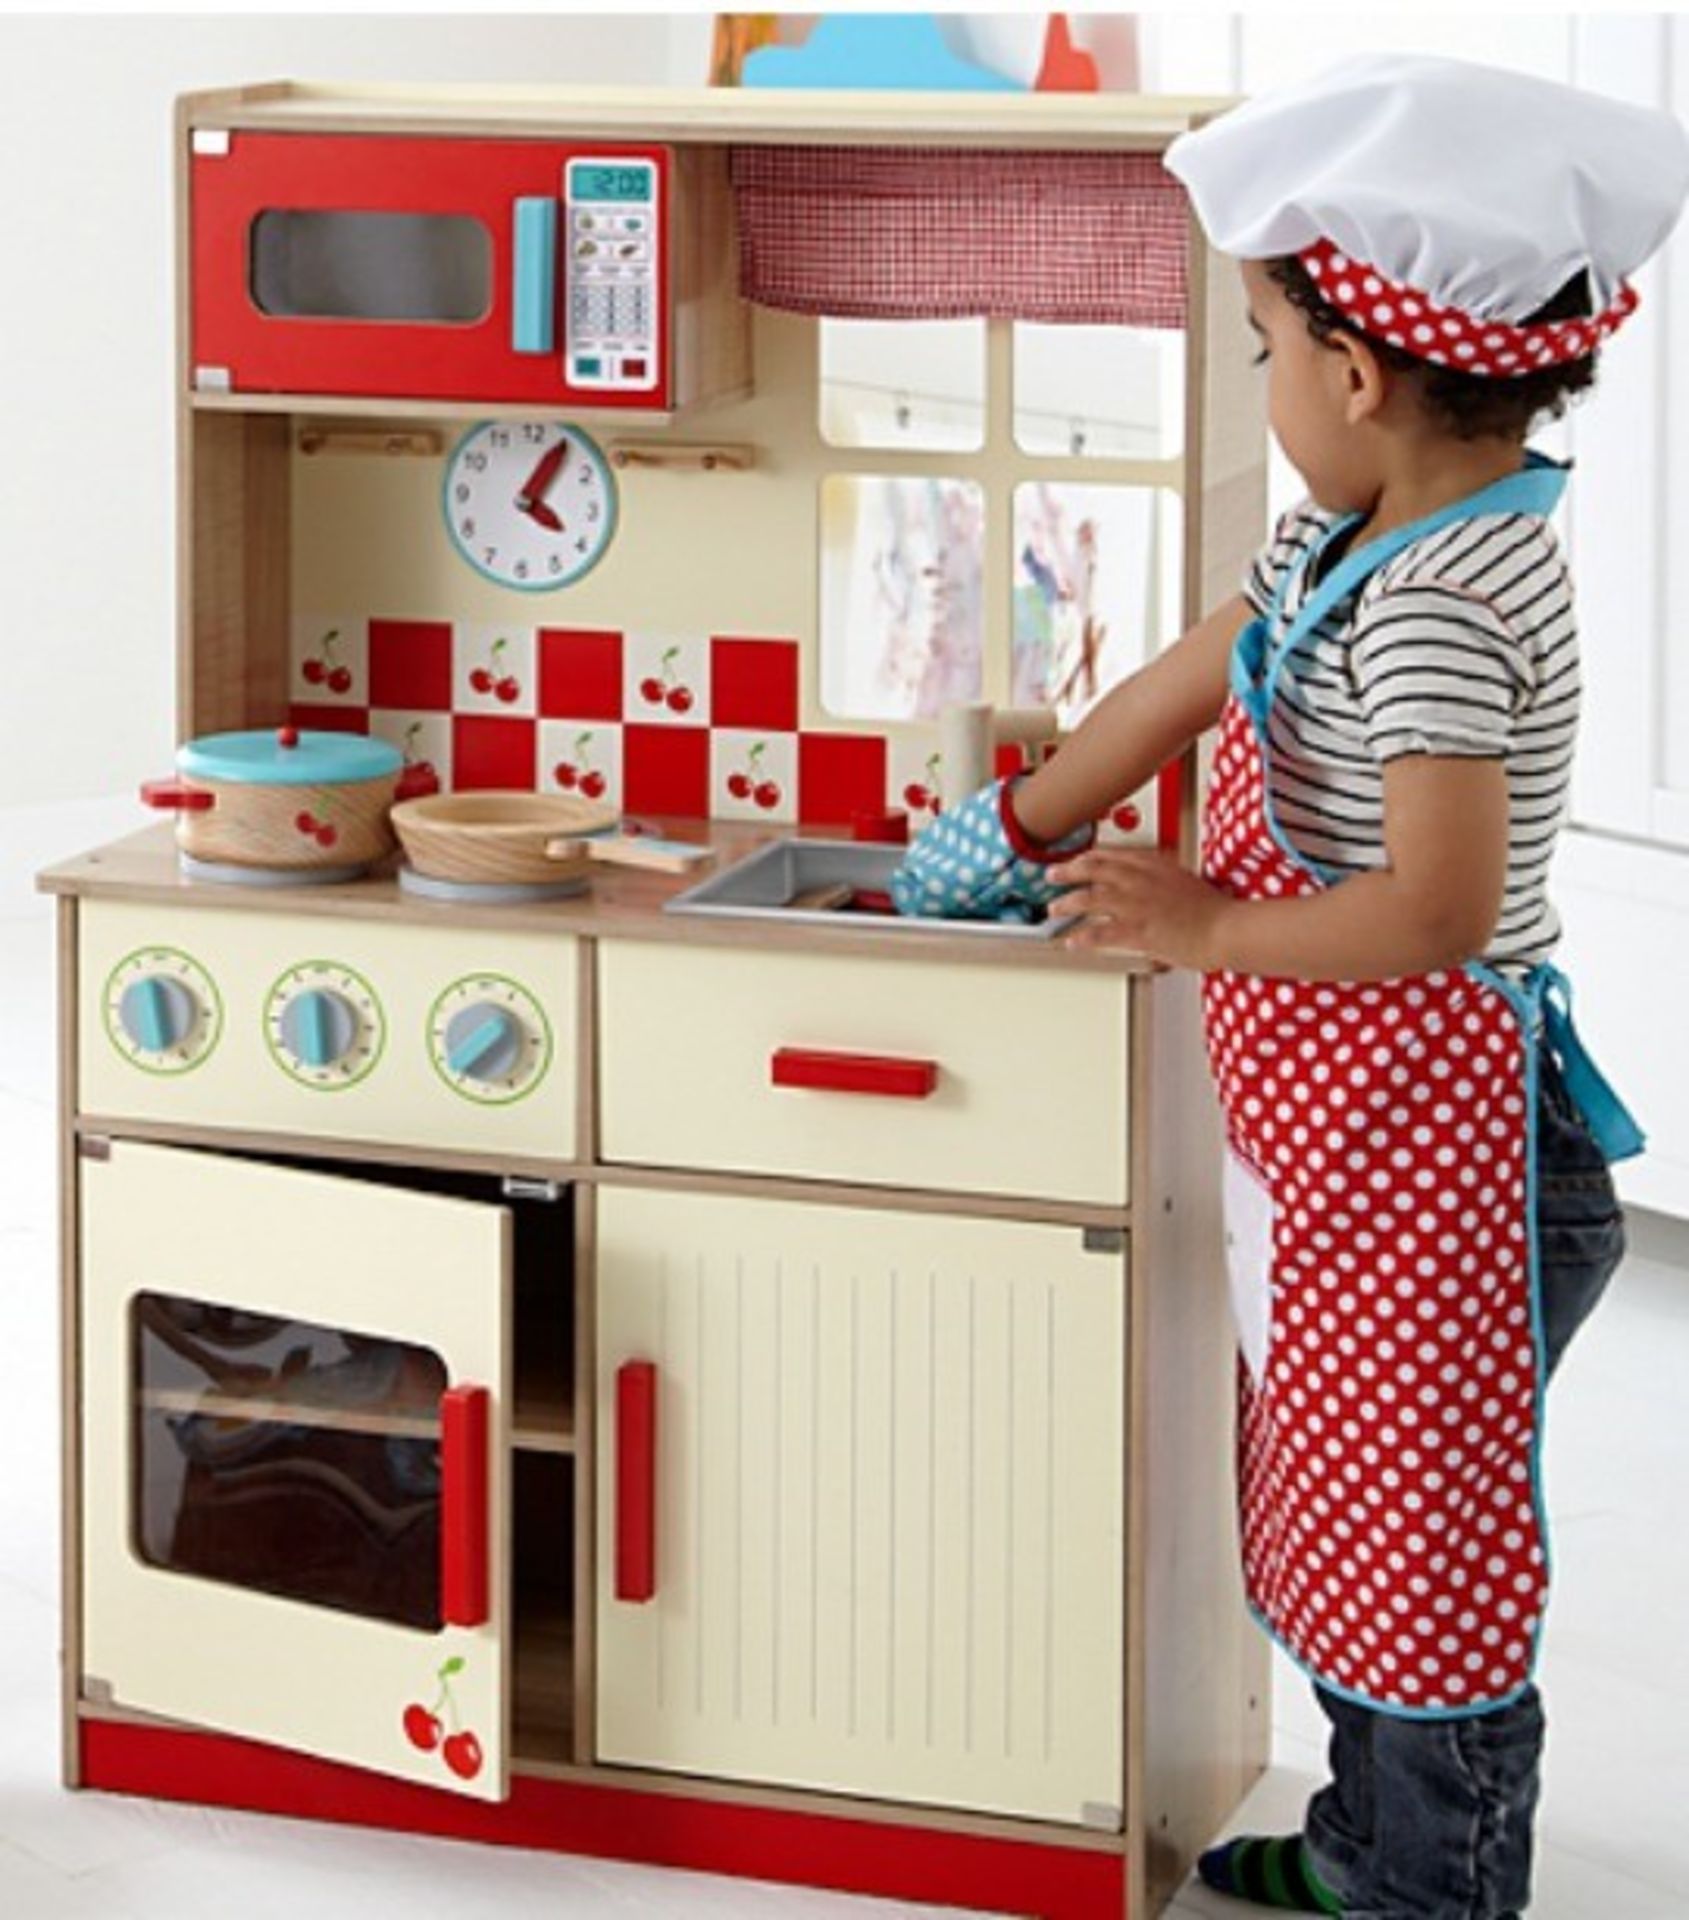 George Home Kitchen Play set, in 2 boxes, both unchecked, please also note that we believe this